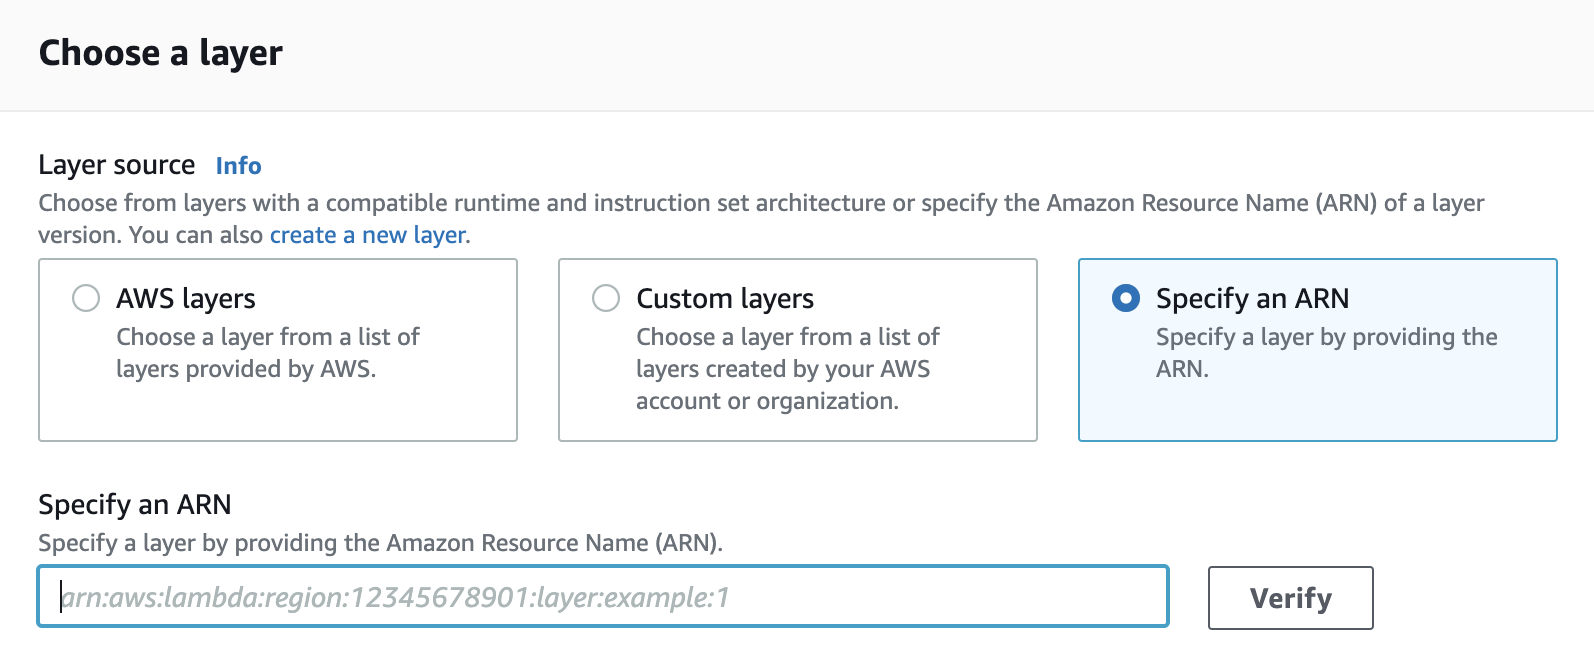 image of choosing a layer in AWS Console